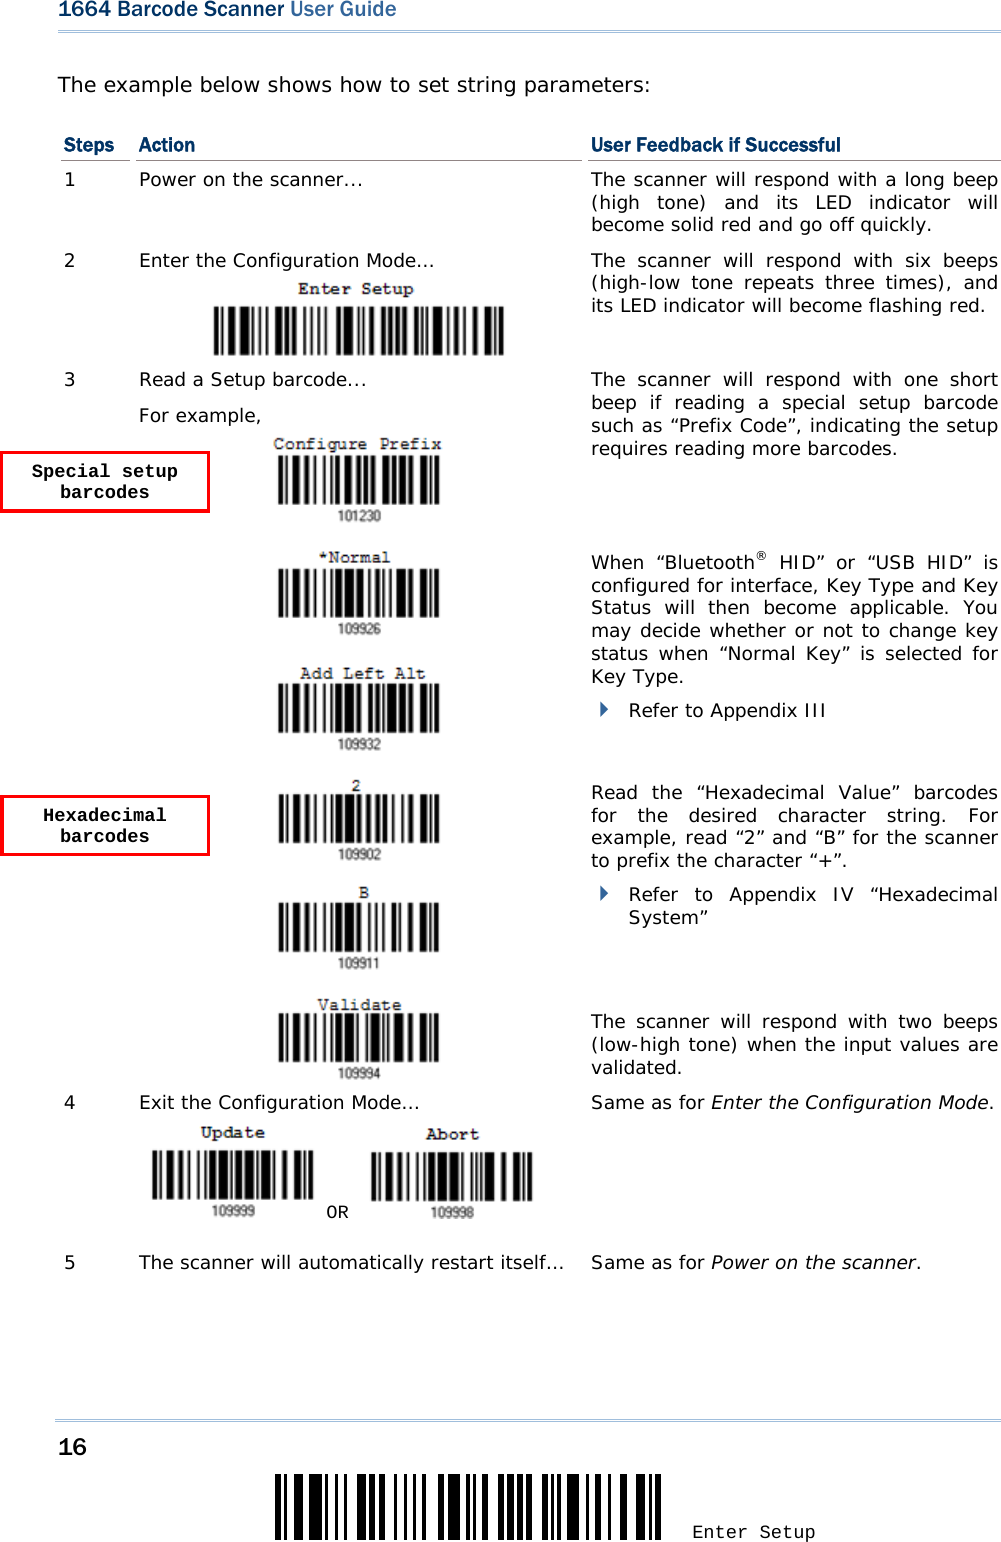 16 Enter Setup 1664 Barcode Scanner User Guide  The example below shows how to set string parameters: Steps  Action  User Feedback if Successful 1  Power on the scanner... The scanner will respond with a long beep (high tone) and its LED indicator will become solid red and go off quickly. 2  Enter the Configuration Mode… The scanner will respond with six beeps (high-low tone repeats three times), and its LED indicator will become flashing red.  3  Read a Setup barcode... For example,   The scanner will respond with one short beep if reading a special setup barcode such as “Prefix Code”, indicating the setup requires reading more barcodes.       When “Bluetooth® HID” or “USB HID” is configured for interface, Key Type and Key Status will then become applicable. You may decide whether or not to change key status when “Normal Key” is selected for Key Type.  Refer to Appendix III     Read the “Hexadecimal Value” barcodes for the desired character string. For example, read “2” and “B” for the scanner to prefix the character “+”.  Refer to Appendix IV “Hexadecimal System”   The scanner will respond with two beeps (low-high tone) when the input values are validated. 4  Exit the Configuration Mode…   OR     Same as for Enter the Configuration Mode. 5  The scanner will automatically restart itself…  Same as for Power on the scanner.   Special setup barcodes Hexadecimal barcodes 